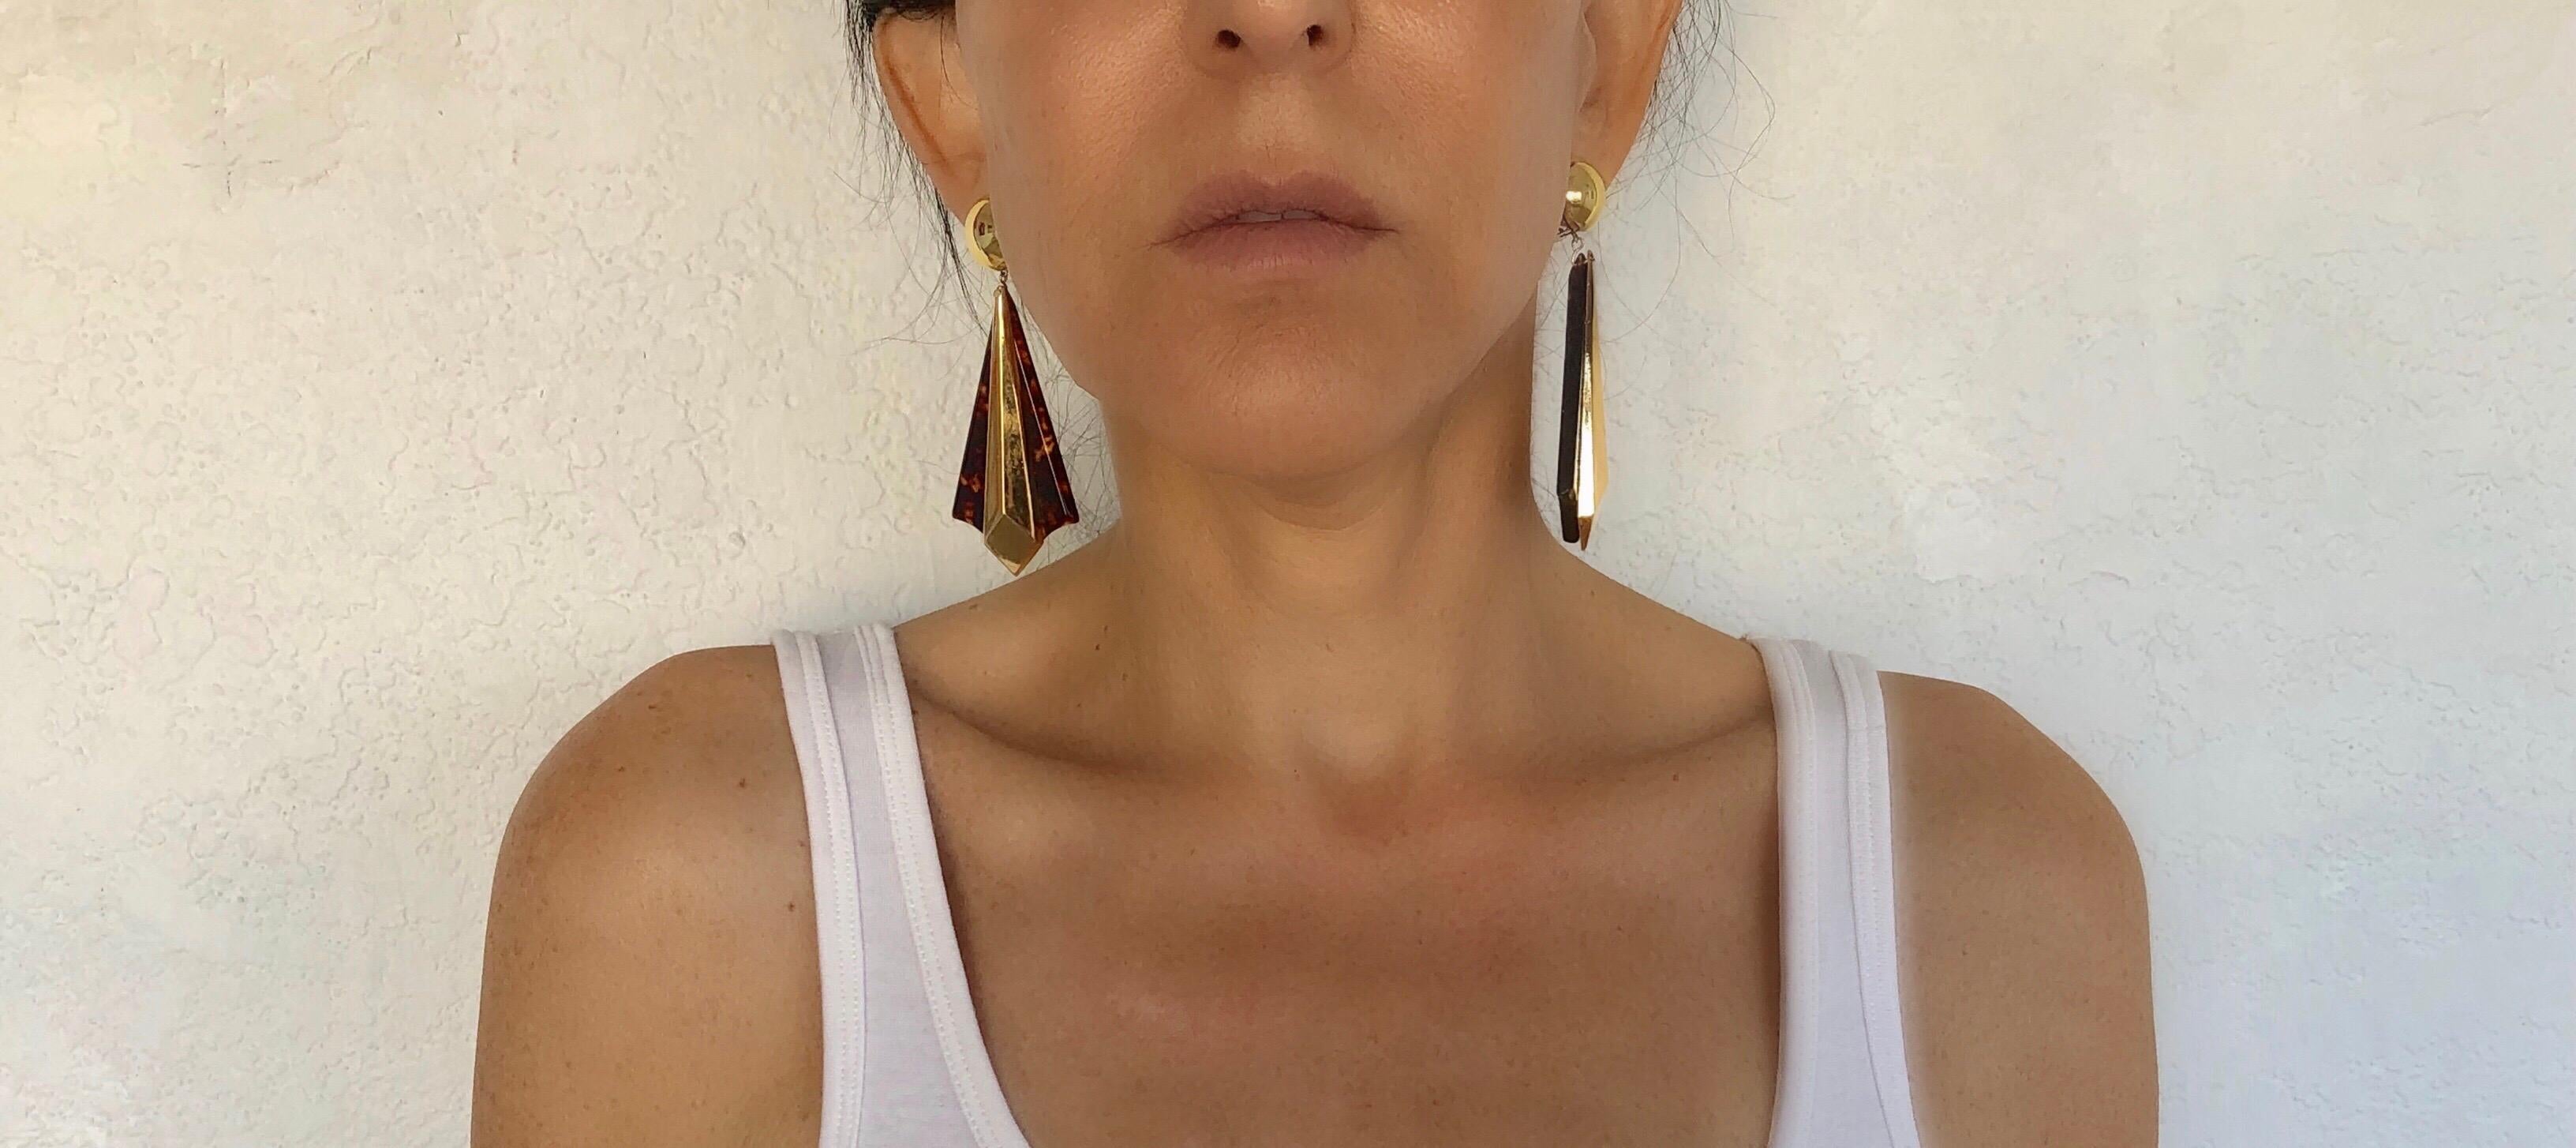 Vintage French architectural statements earrings made in Paris France circa 1980's - the artchitectural earrings are comprised of faux tortoise acrylic and are accented with gold findings. The clip-on earrings are lighweight and comfortable to wear. 